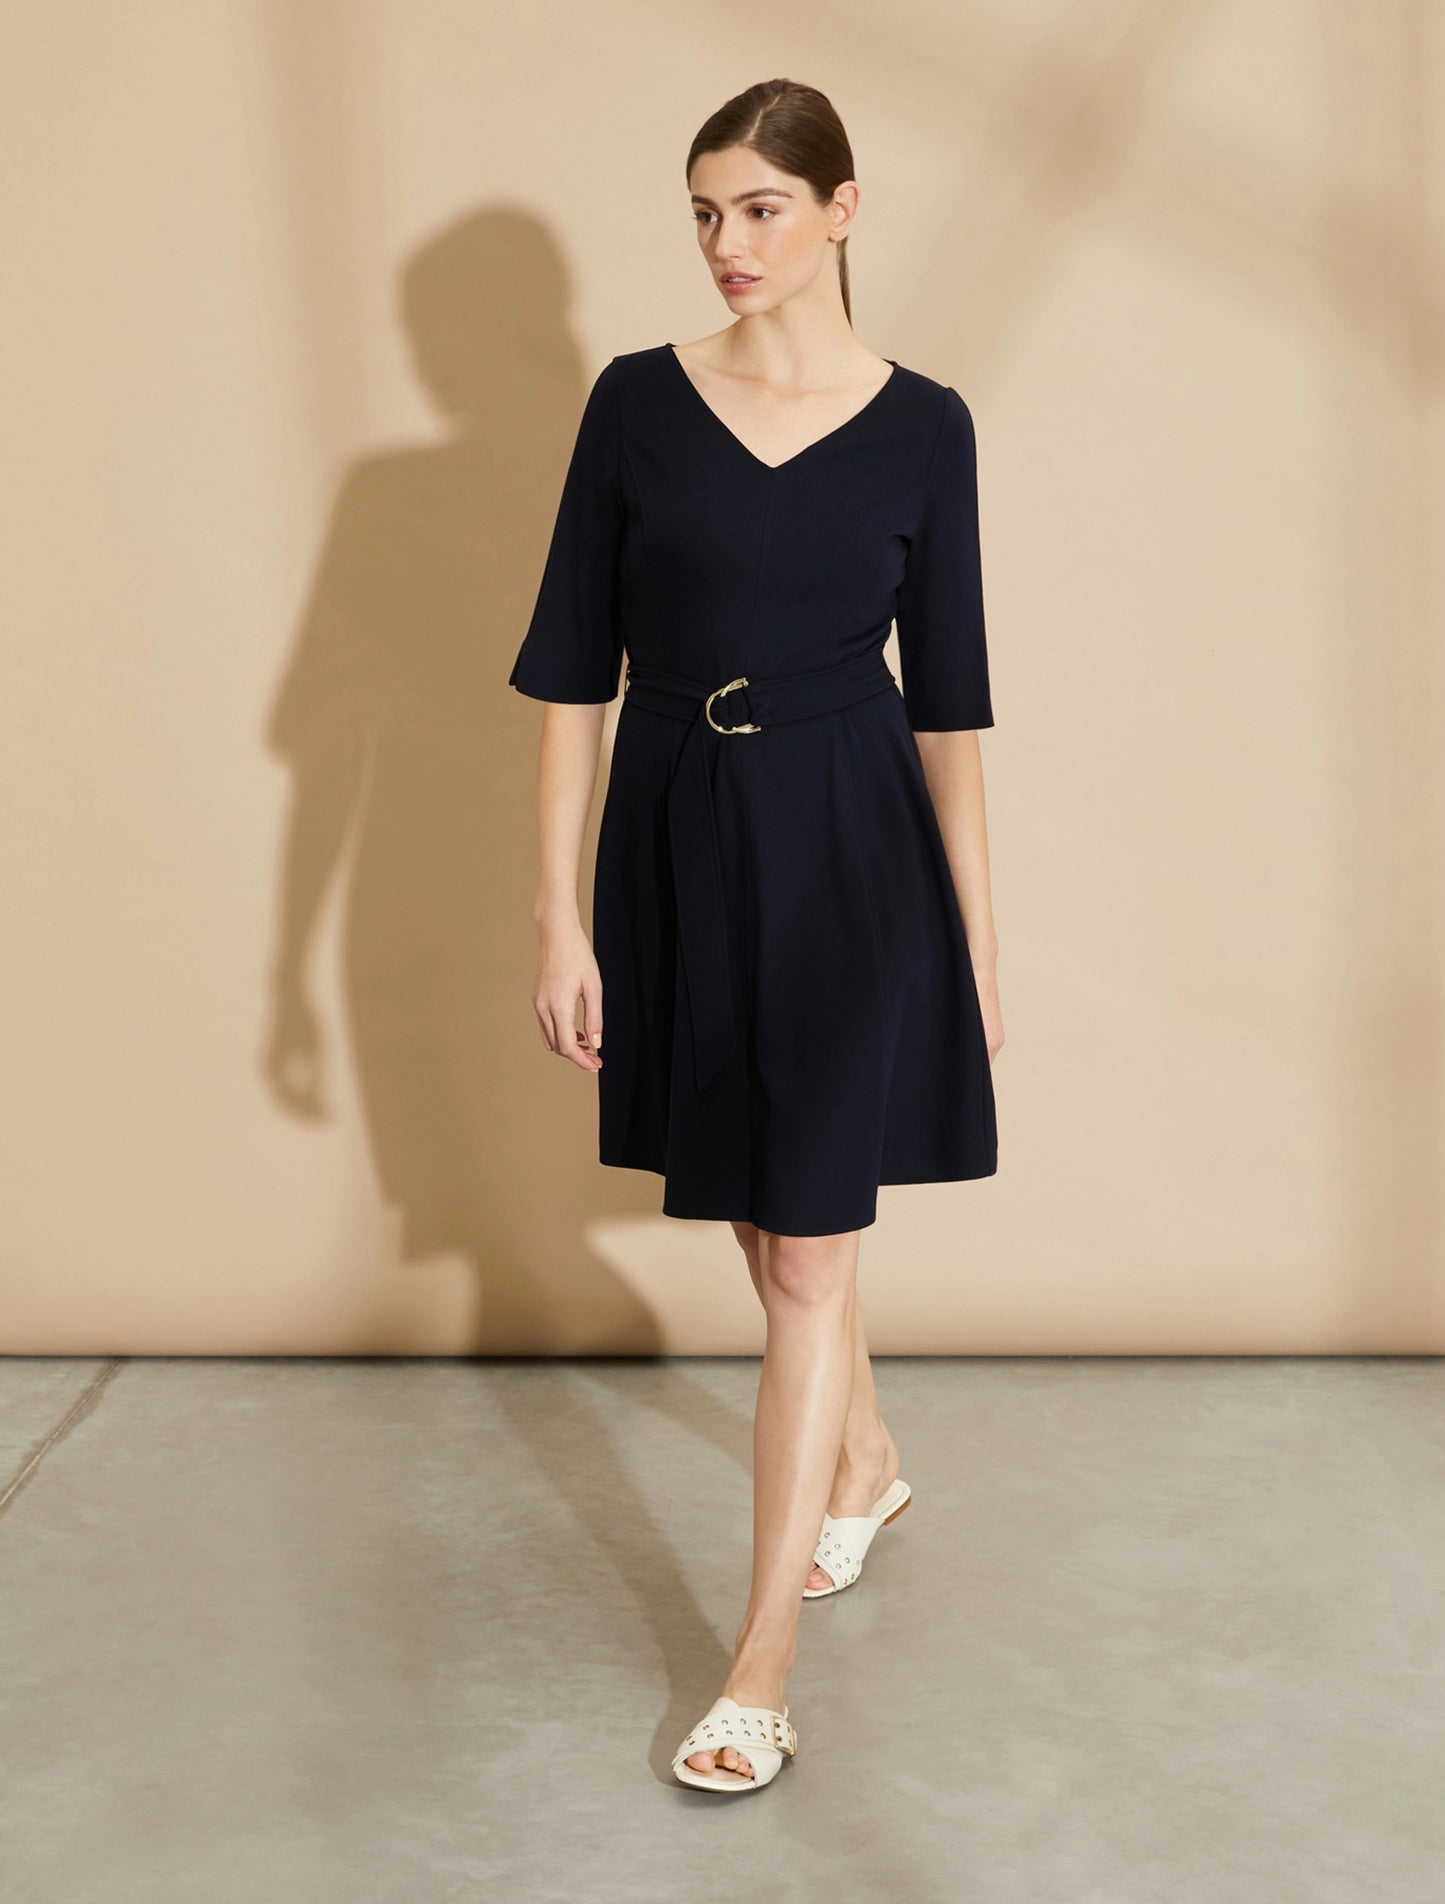 Penny Black | Visibile Fit & flare jersey dress - mignight blue